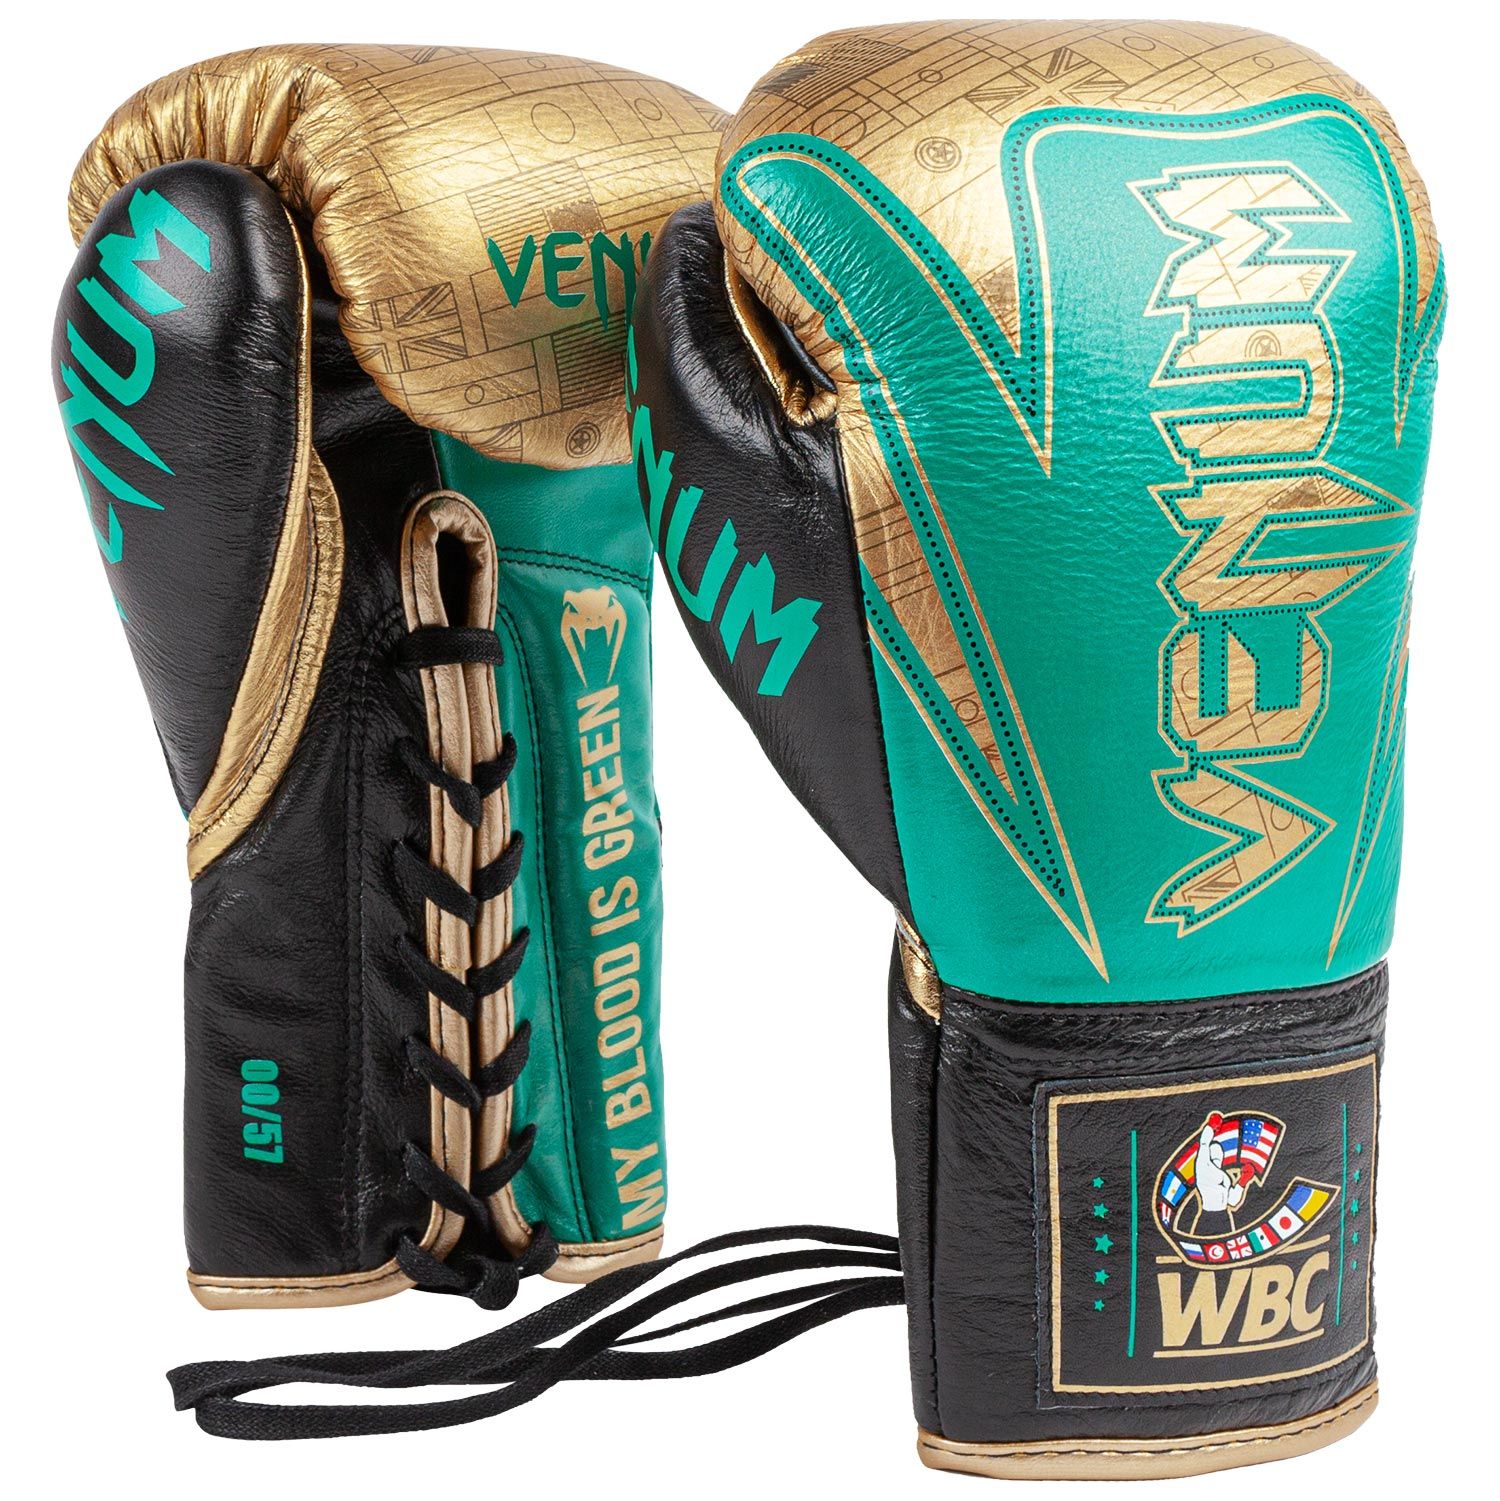 Venum Hammer Pro Boxing Gloves WBC Limited Edition With Laces Green Metallic/Gold Venum